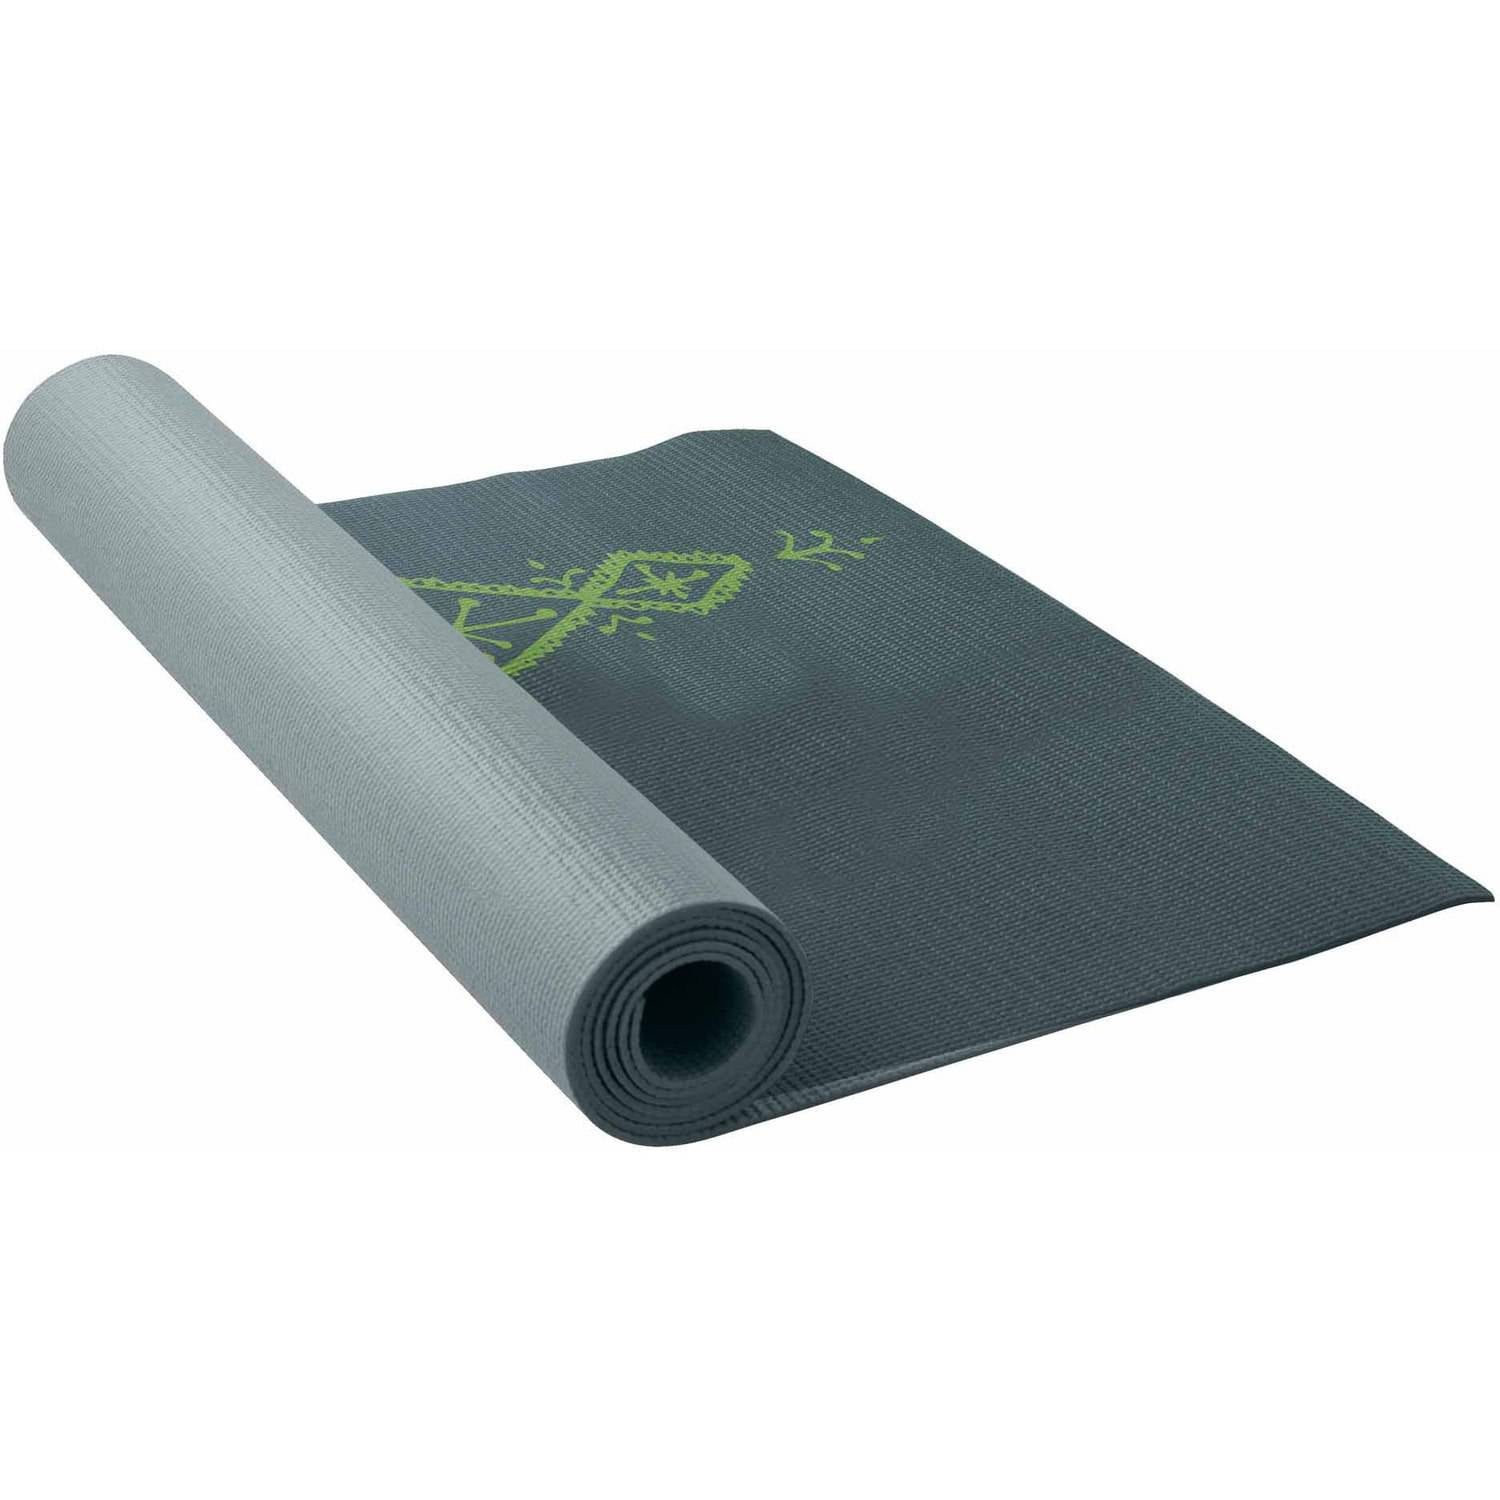 printed exercise mats